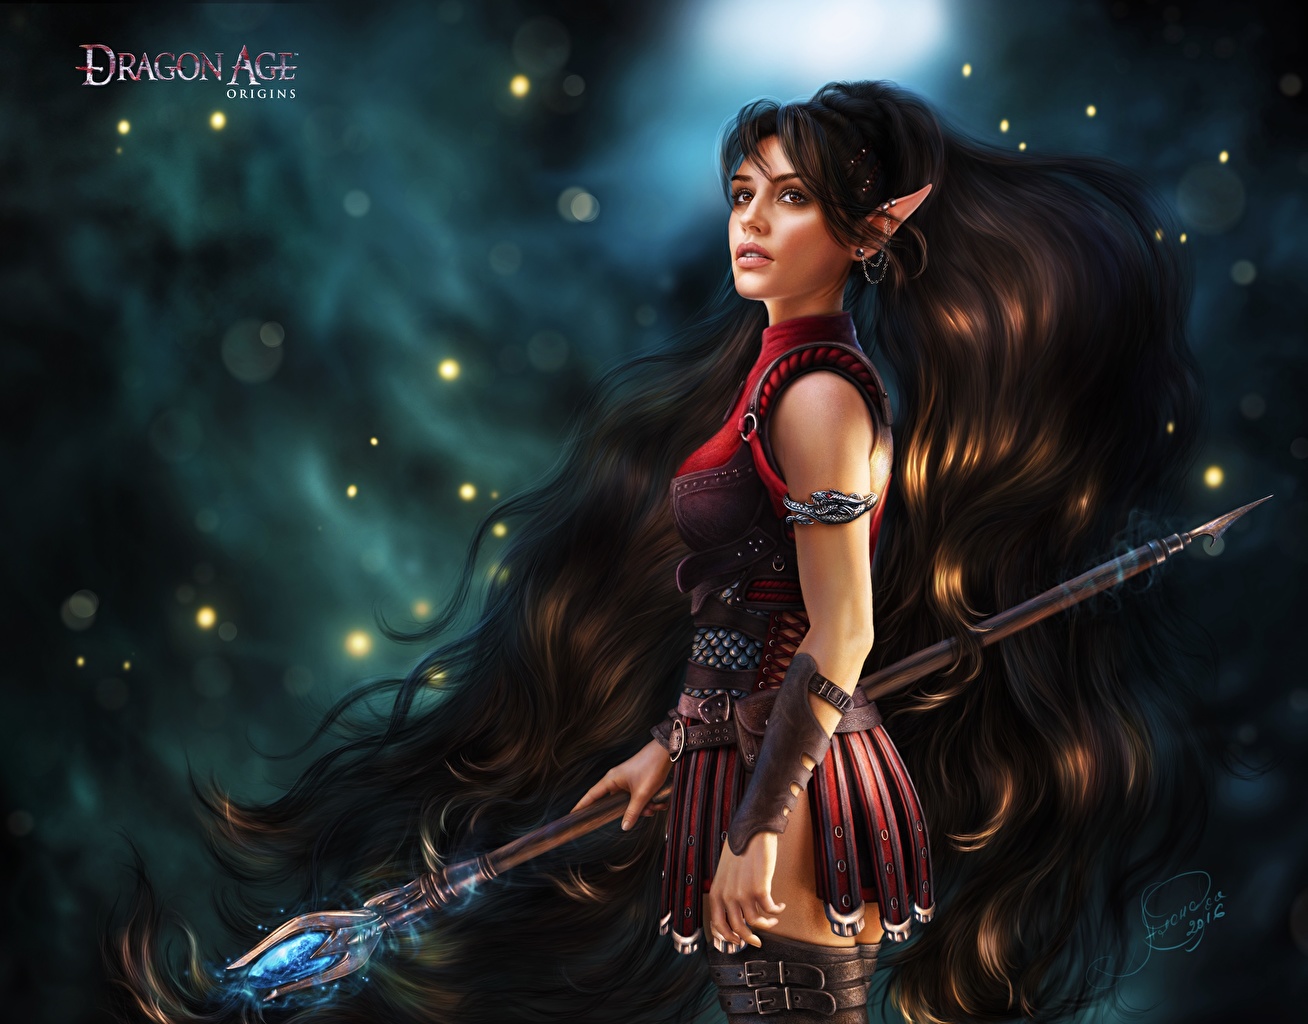 Image Dragon Age Mage Staff Elves Hair Female Fantasy Vdeo Game